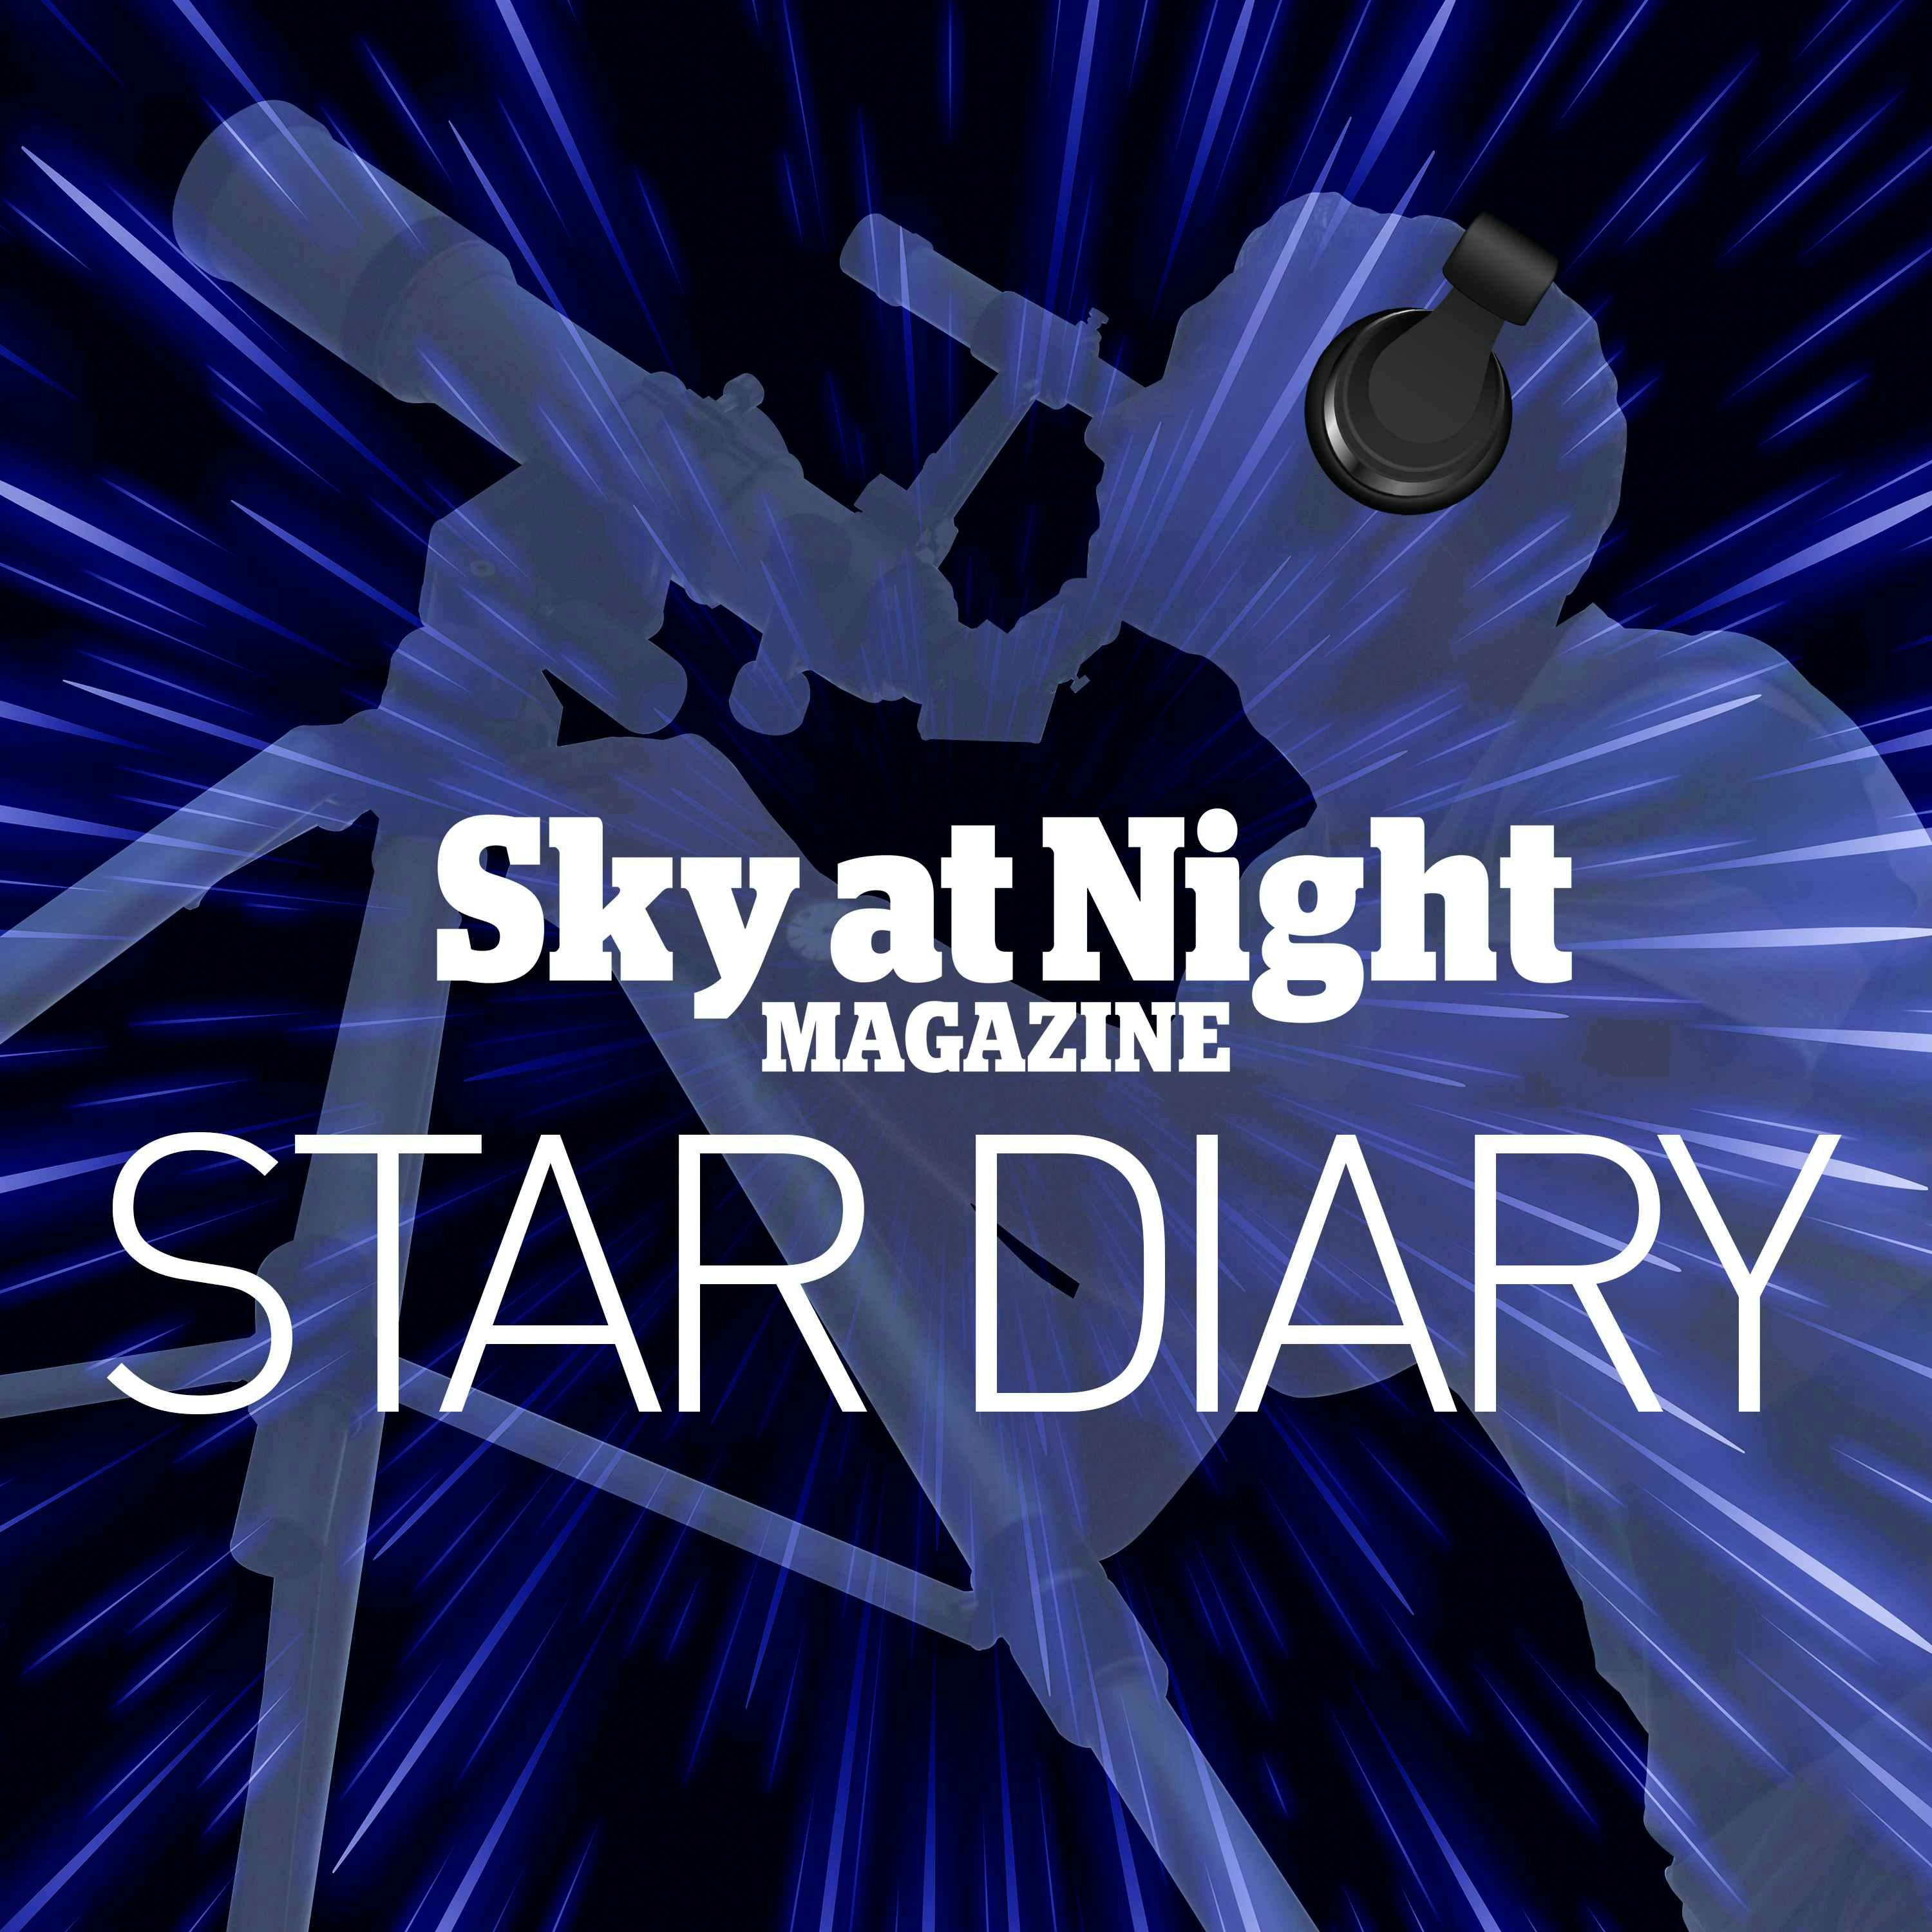 Star Diary: What’s in the night sky, 26 Dec '22 to 1 Jan '23